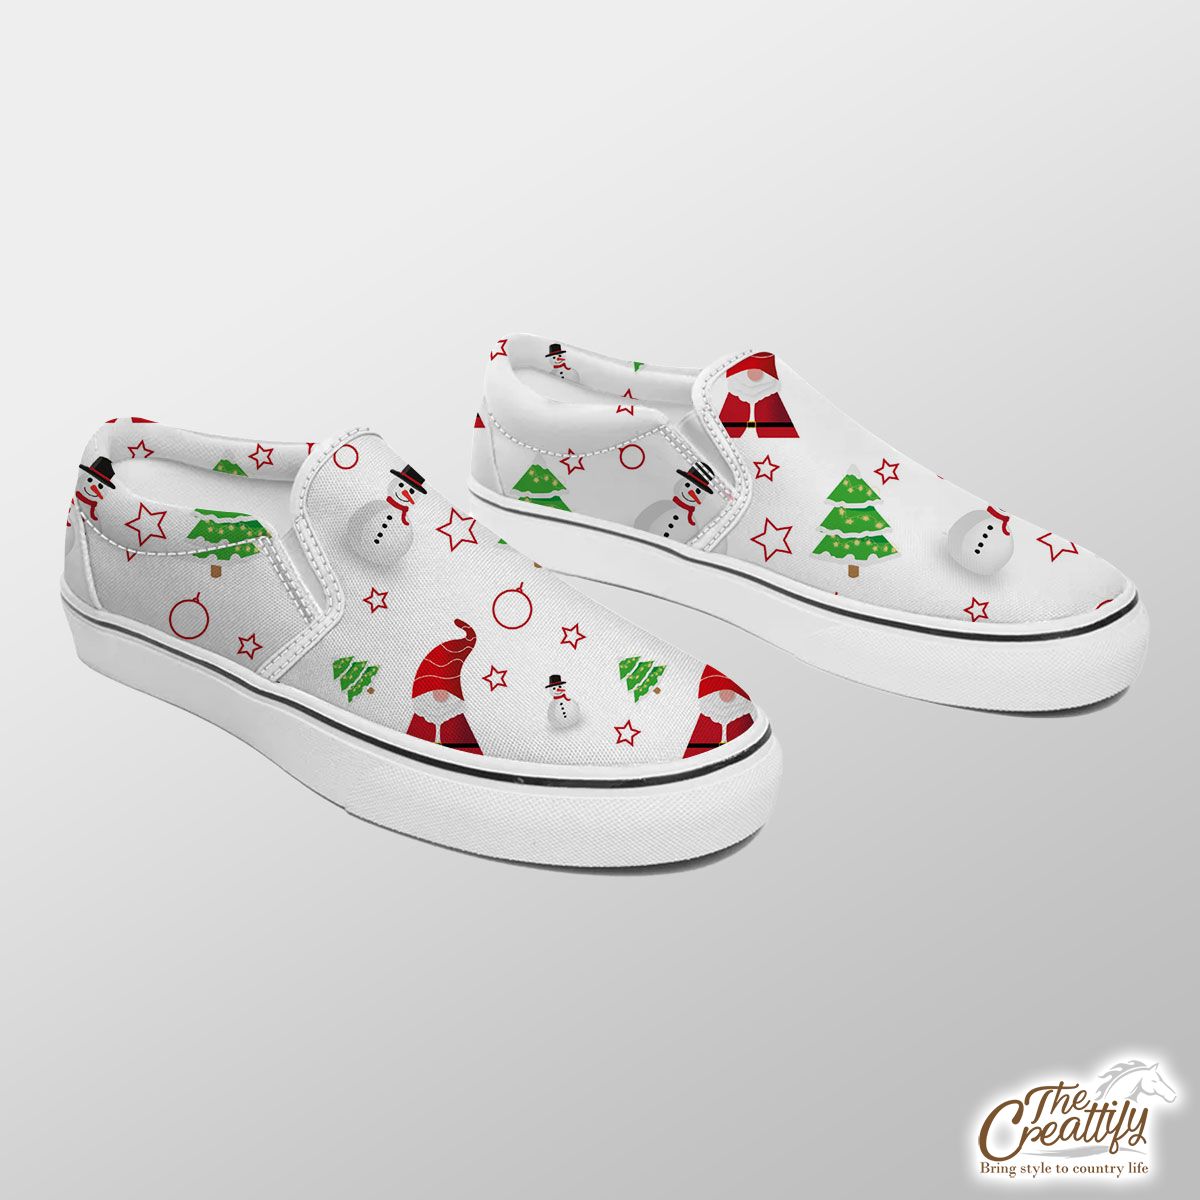 Santa Claus, Snowman Clipart And Pine Tree Silhouette Seamless Pattern Slip On Sneakers